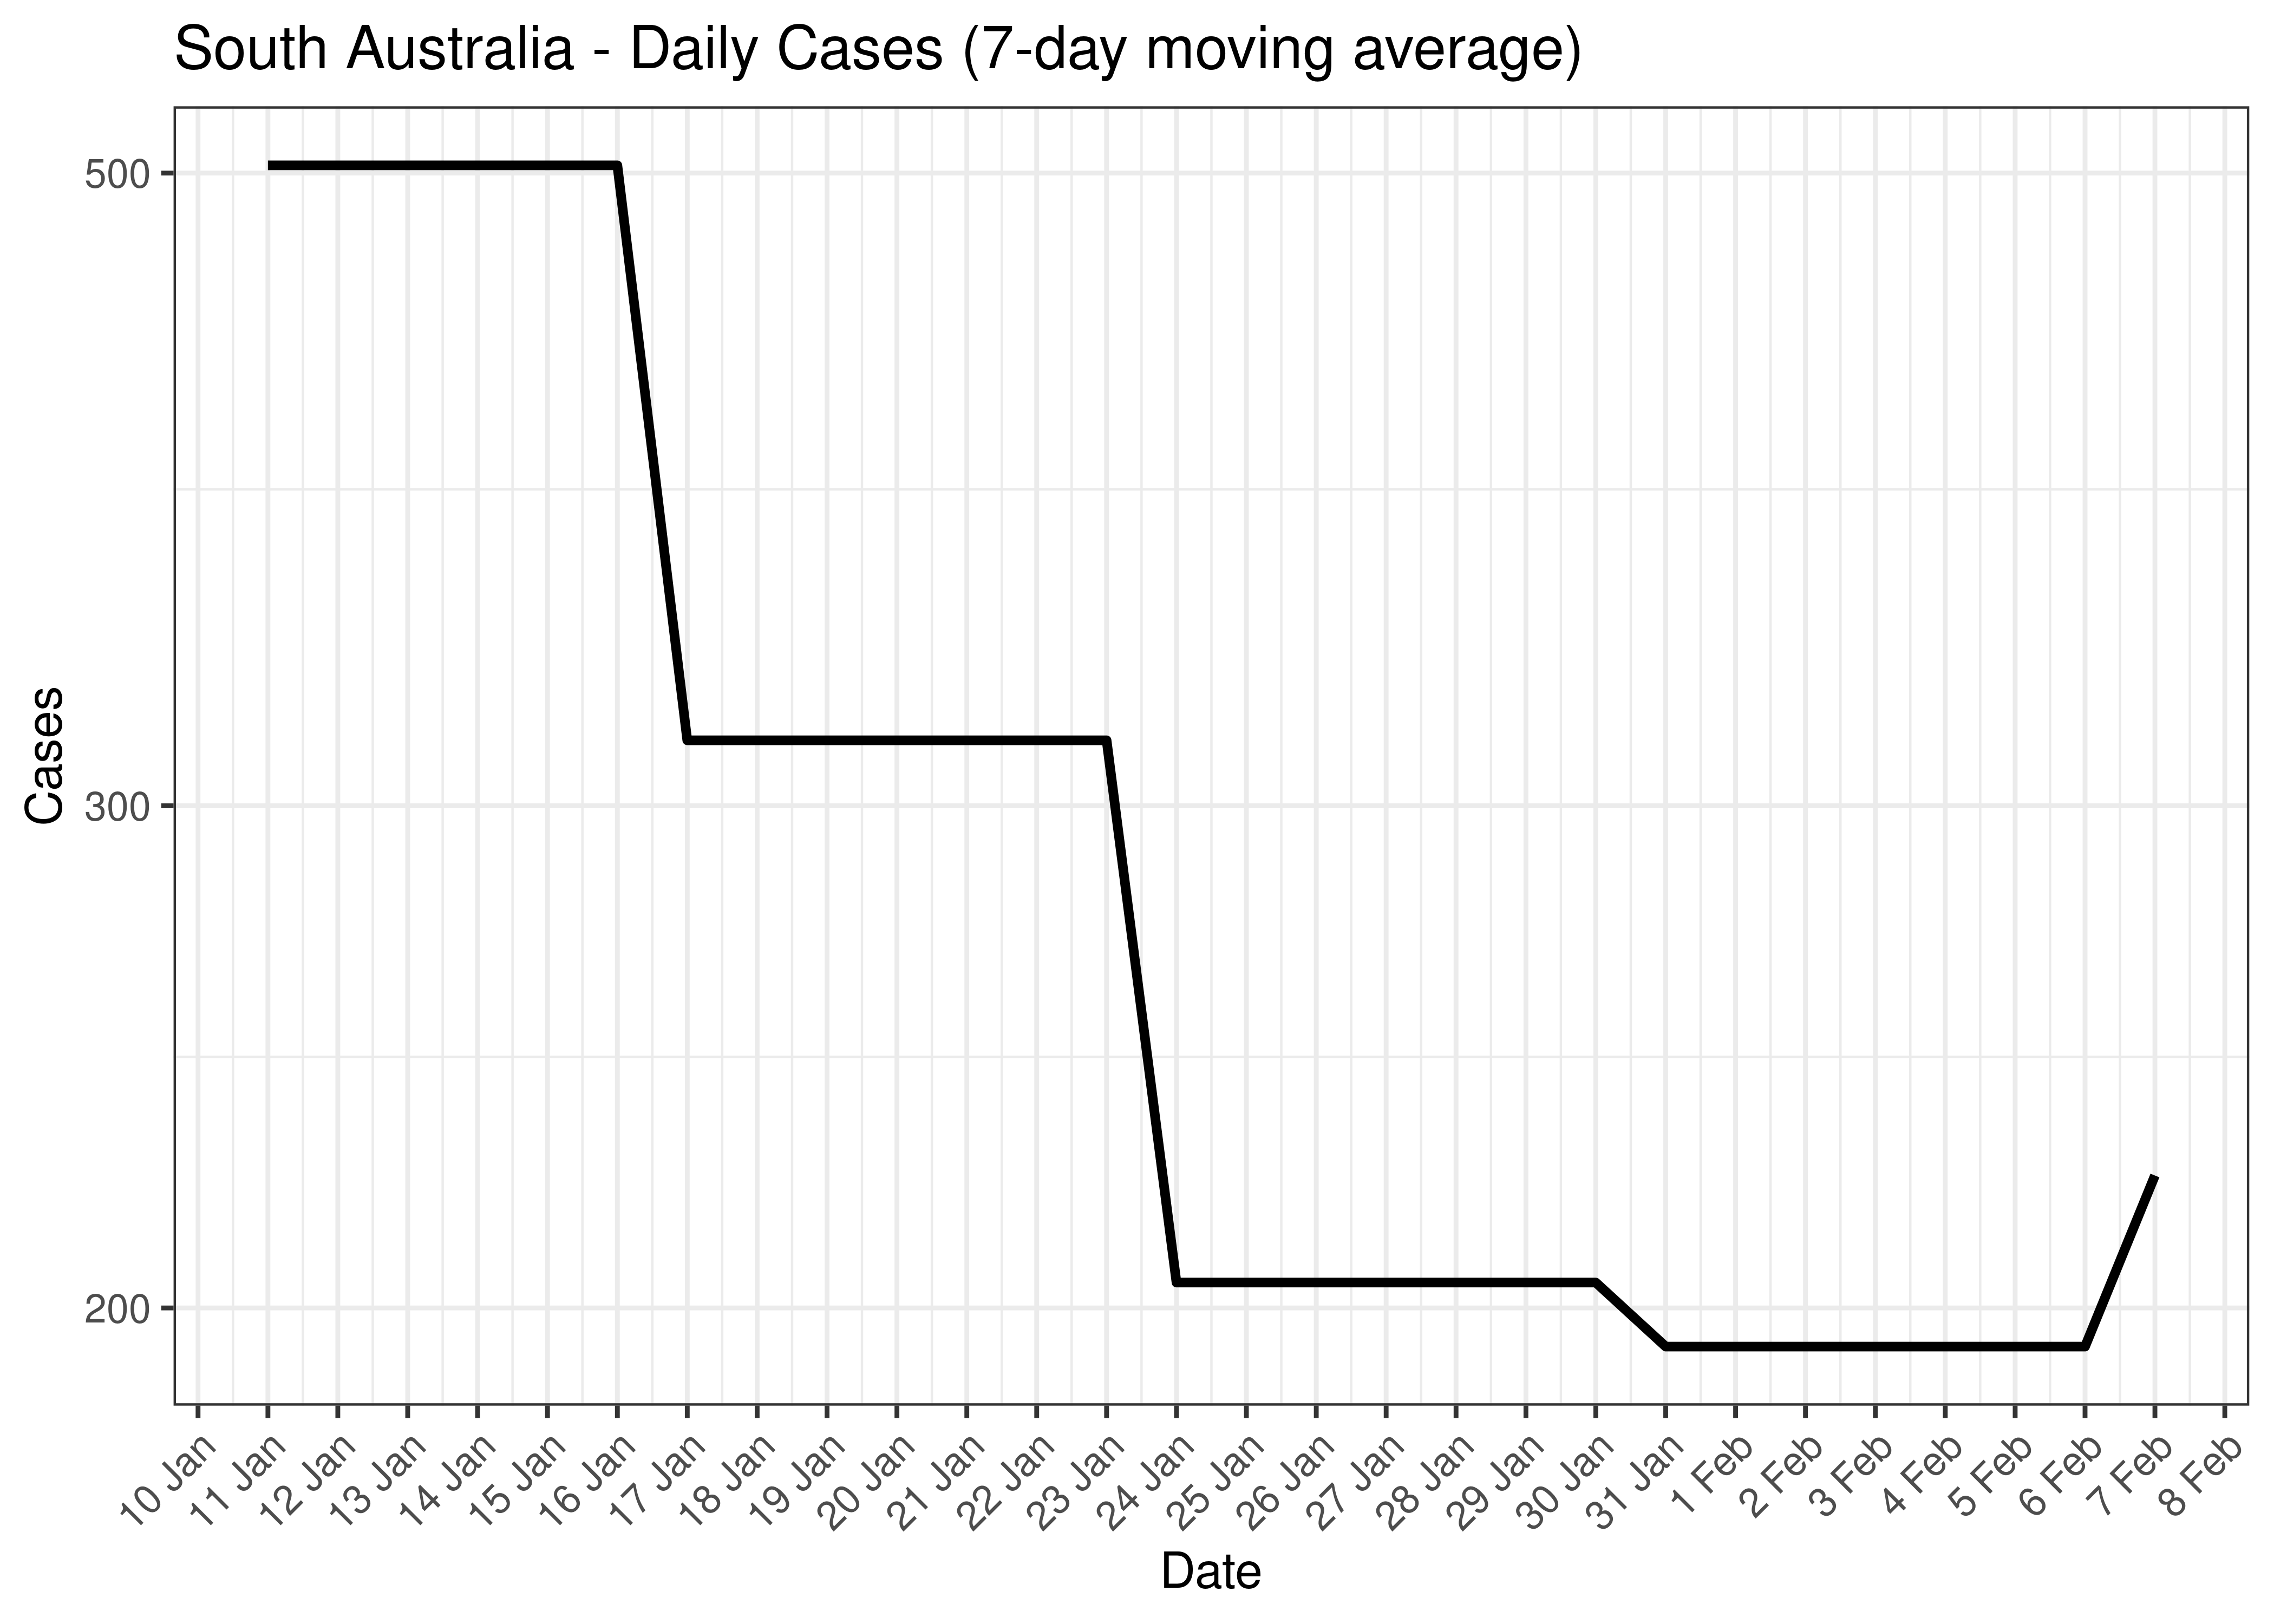 South Australia - Daily Cases for Last 30-days (7-day moving average)